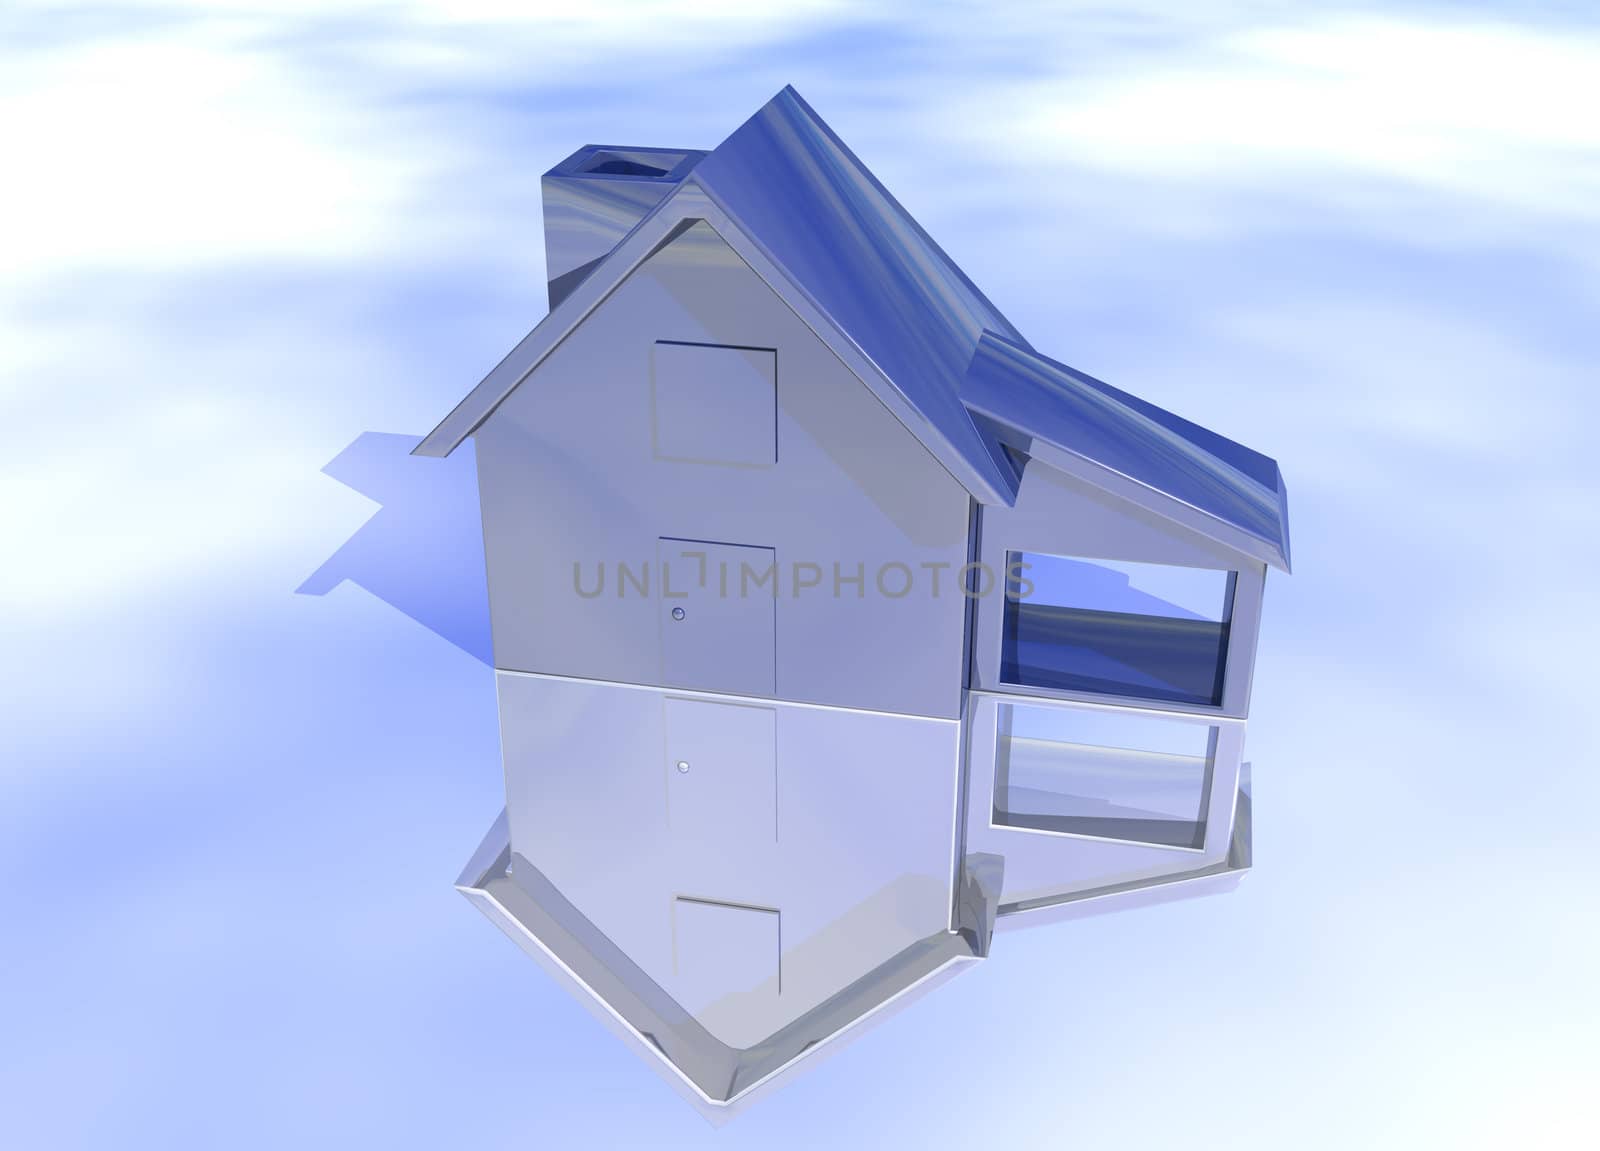 Blue Stainless Steel House Model on Blue-Sky Background with Reflection Concept Cool Clean Modern